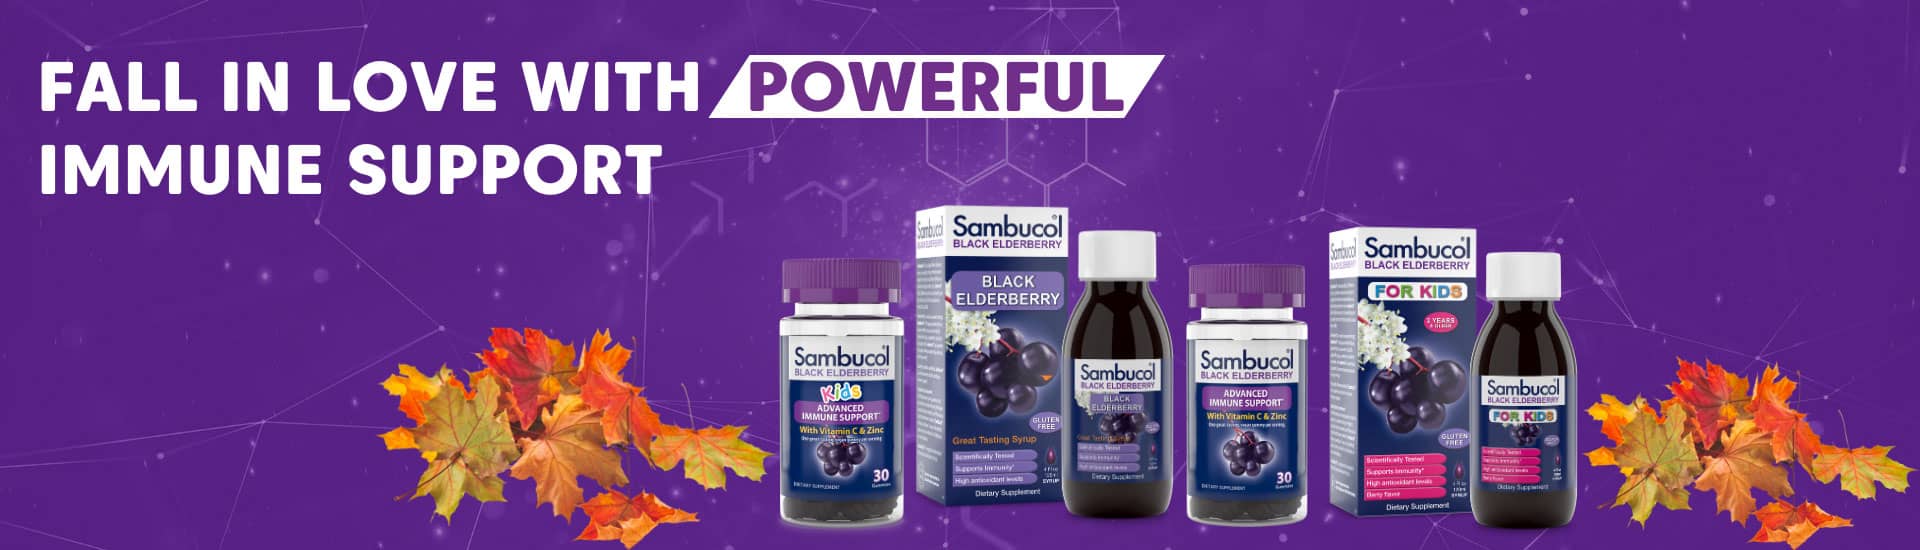 Image of Sambucol products with fall leaves that says fall in love with powerful immune support